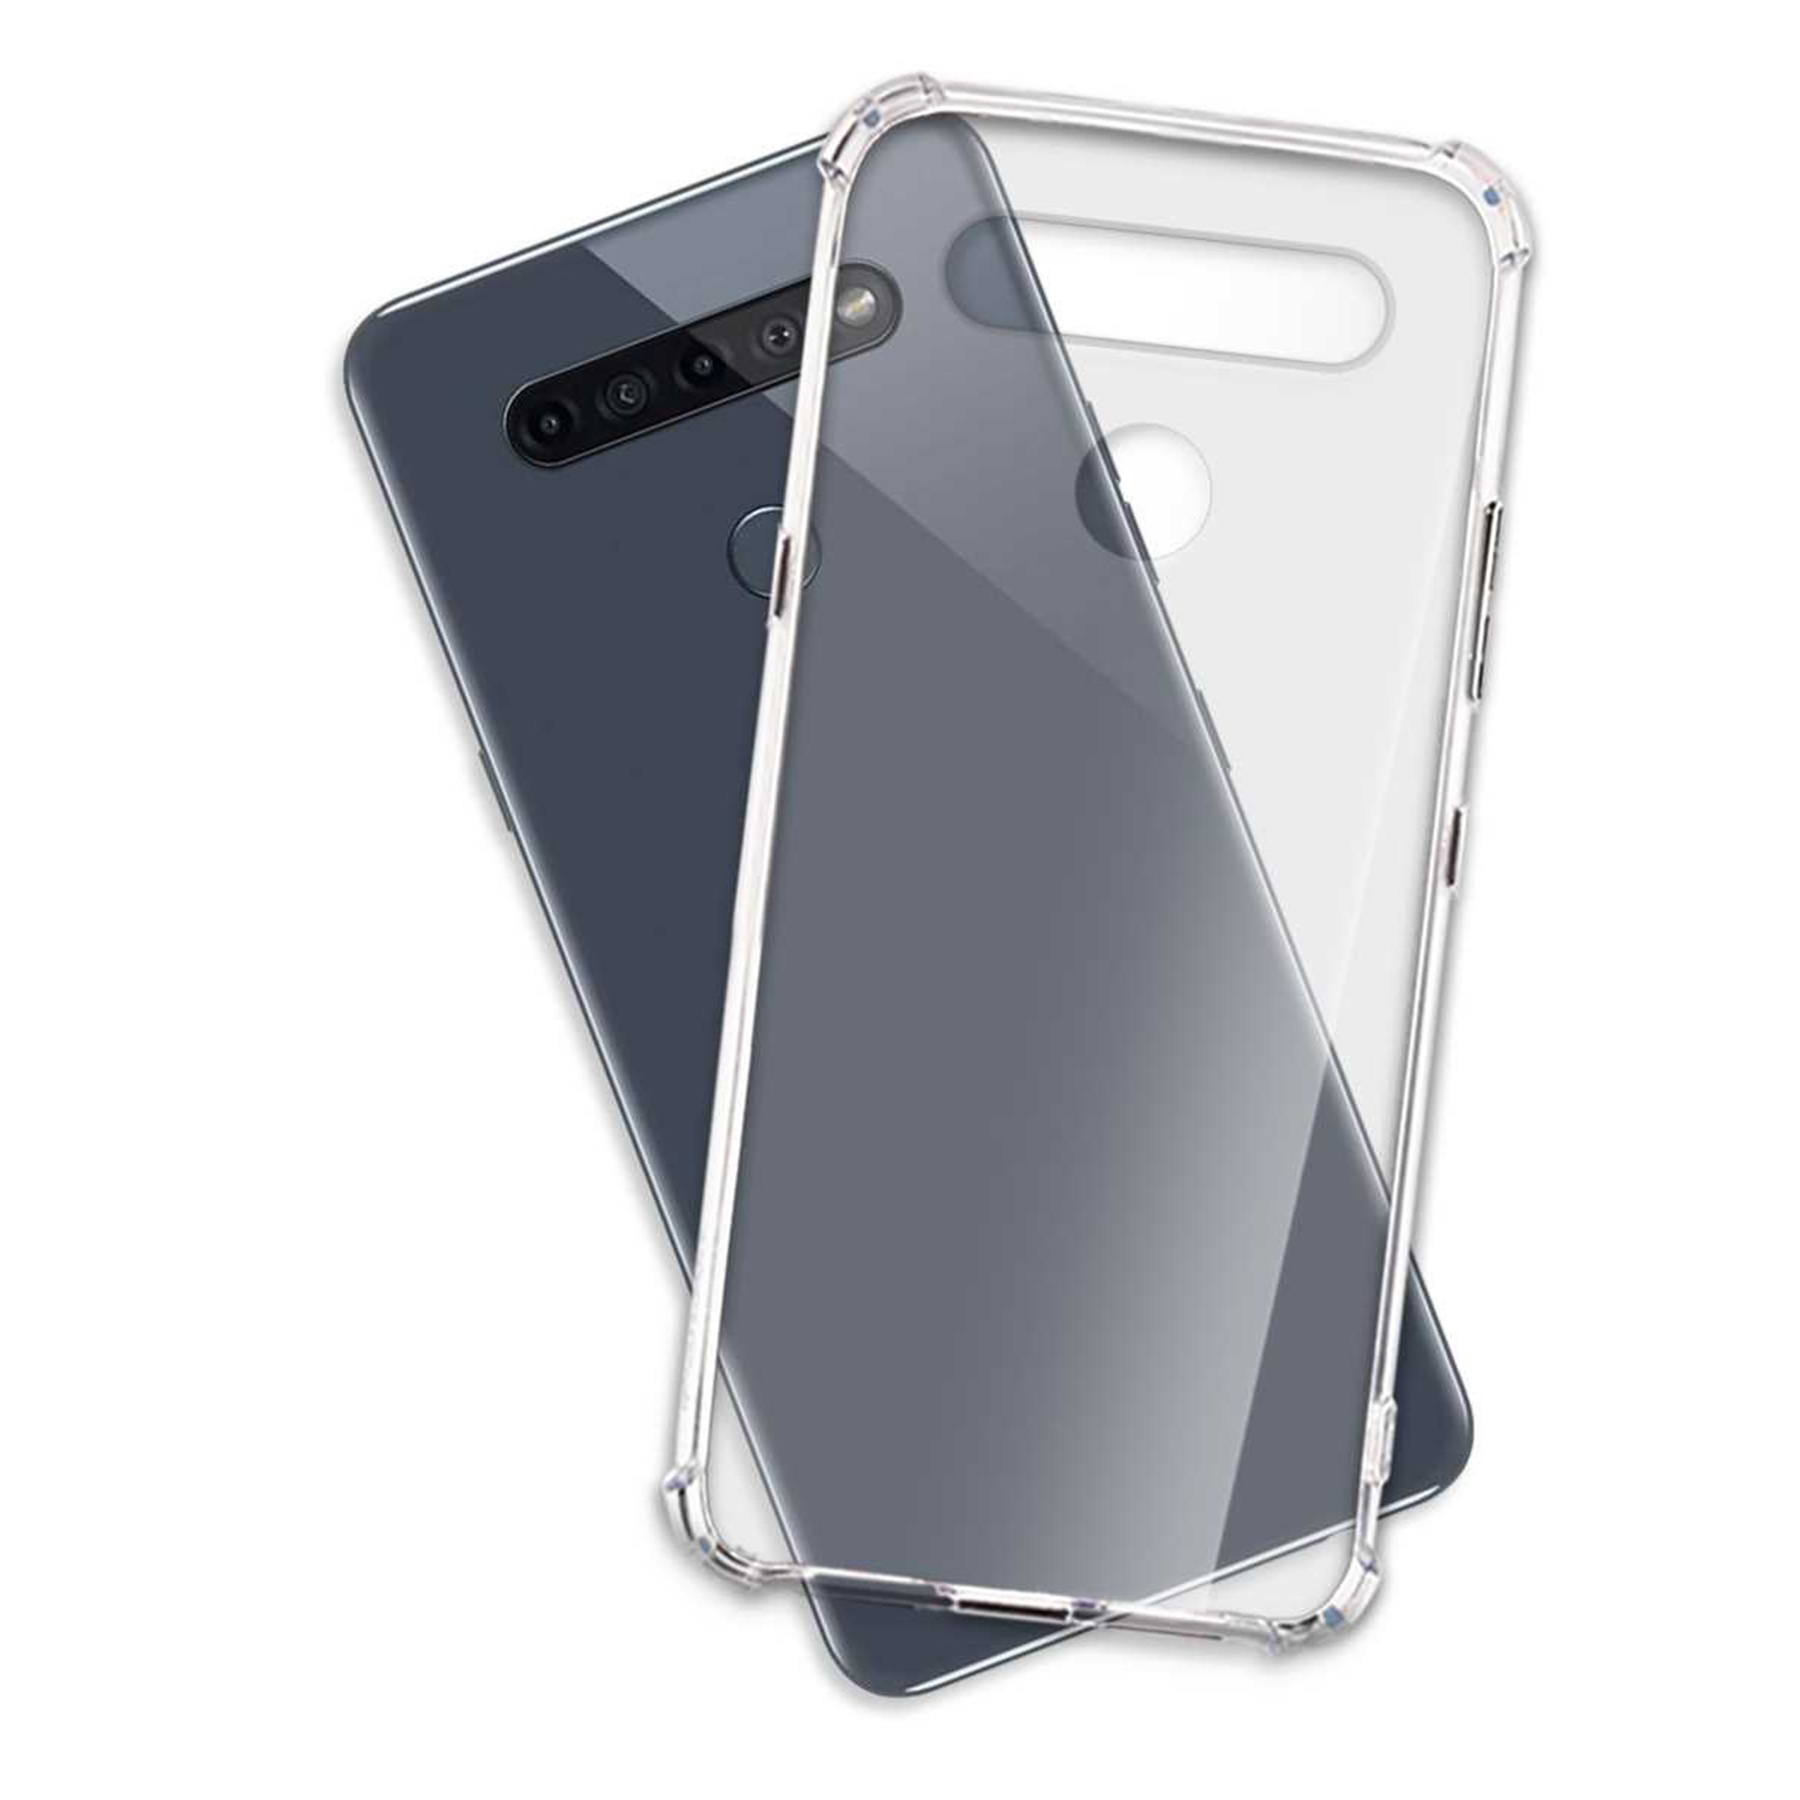 MTB MORE ENERGY Clear Armor K51S, Backcover, Transparent LG, Case